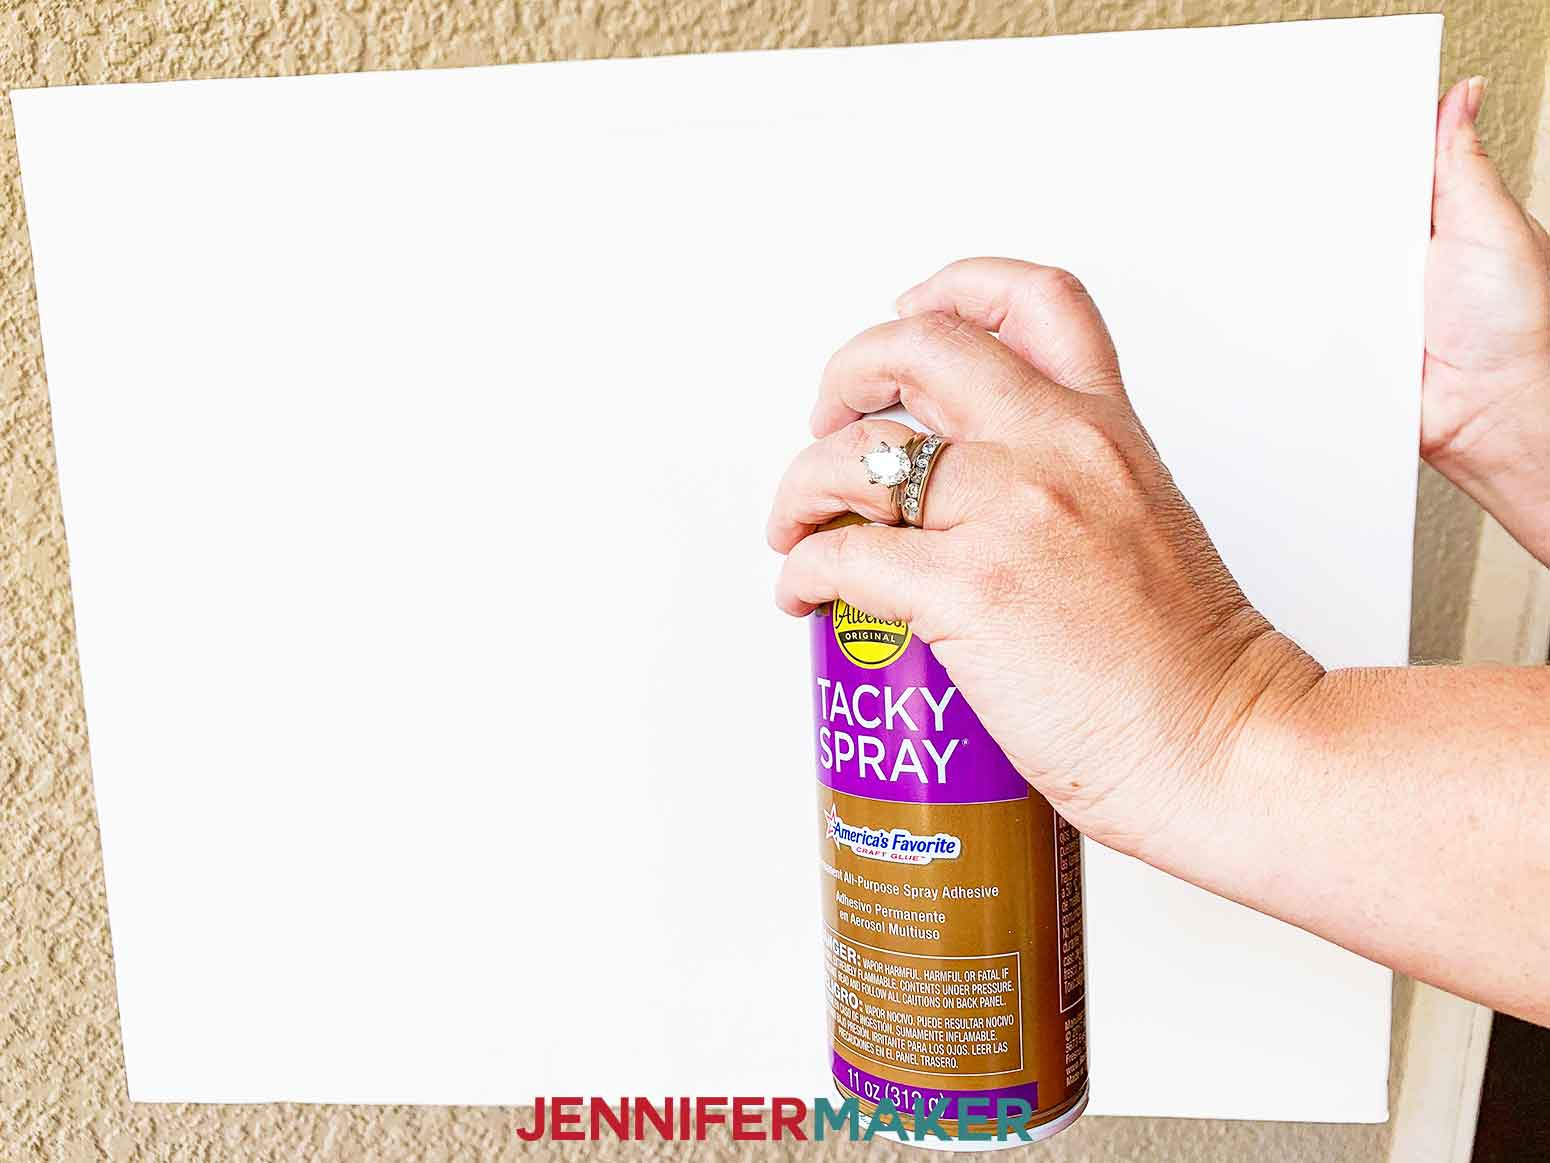 Spraying Tacky Spray on 16" x 20" canvas to prep for applying Easy Paper Heart Tree by JenniferMaker